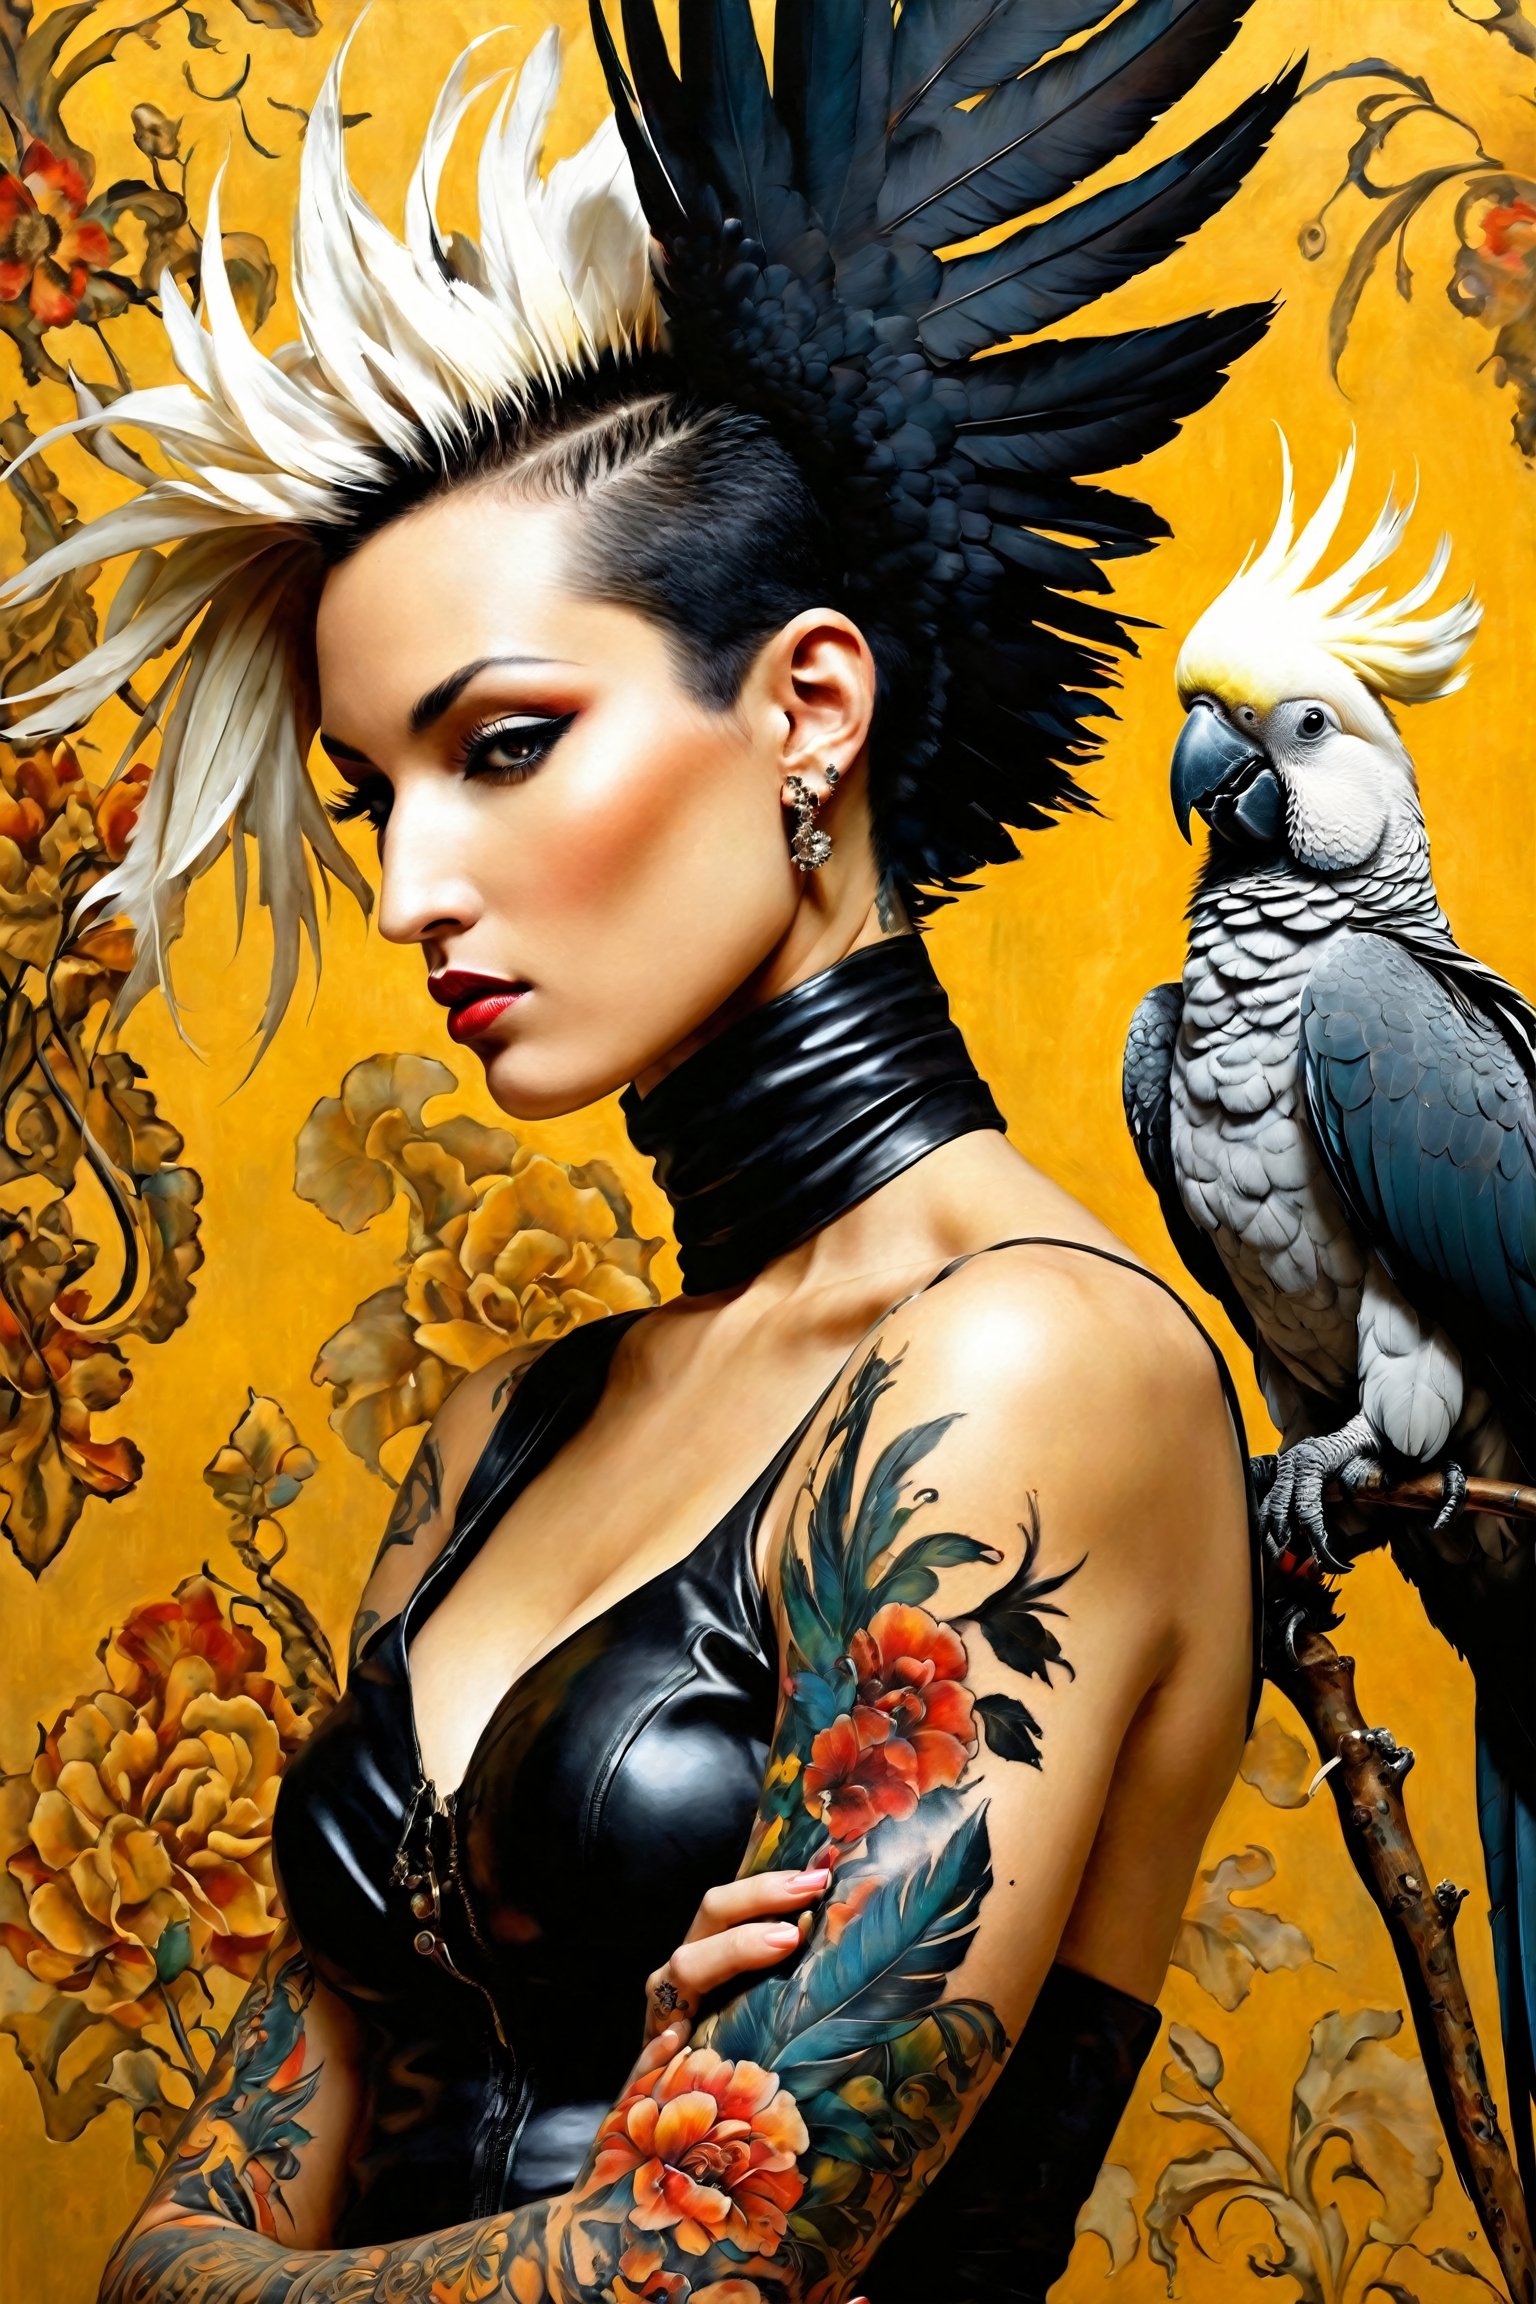 spanish women, black cockatoo, sulphur crested cockatoo, fashionistas, baroque style, art by sergio toppi, art design by sergio toppi, tattoo by ed hardy, shaved hair, neck tattoos andy warhol, heavily muscled, biceps,glam, women, military poster style, ,more detail XL,close up,Oil painting, 8k, highly detailed, in the style of esao andrews,Vogue style,